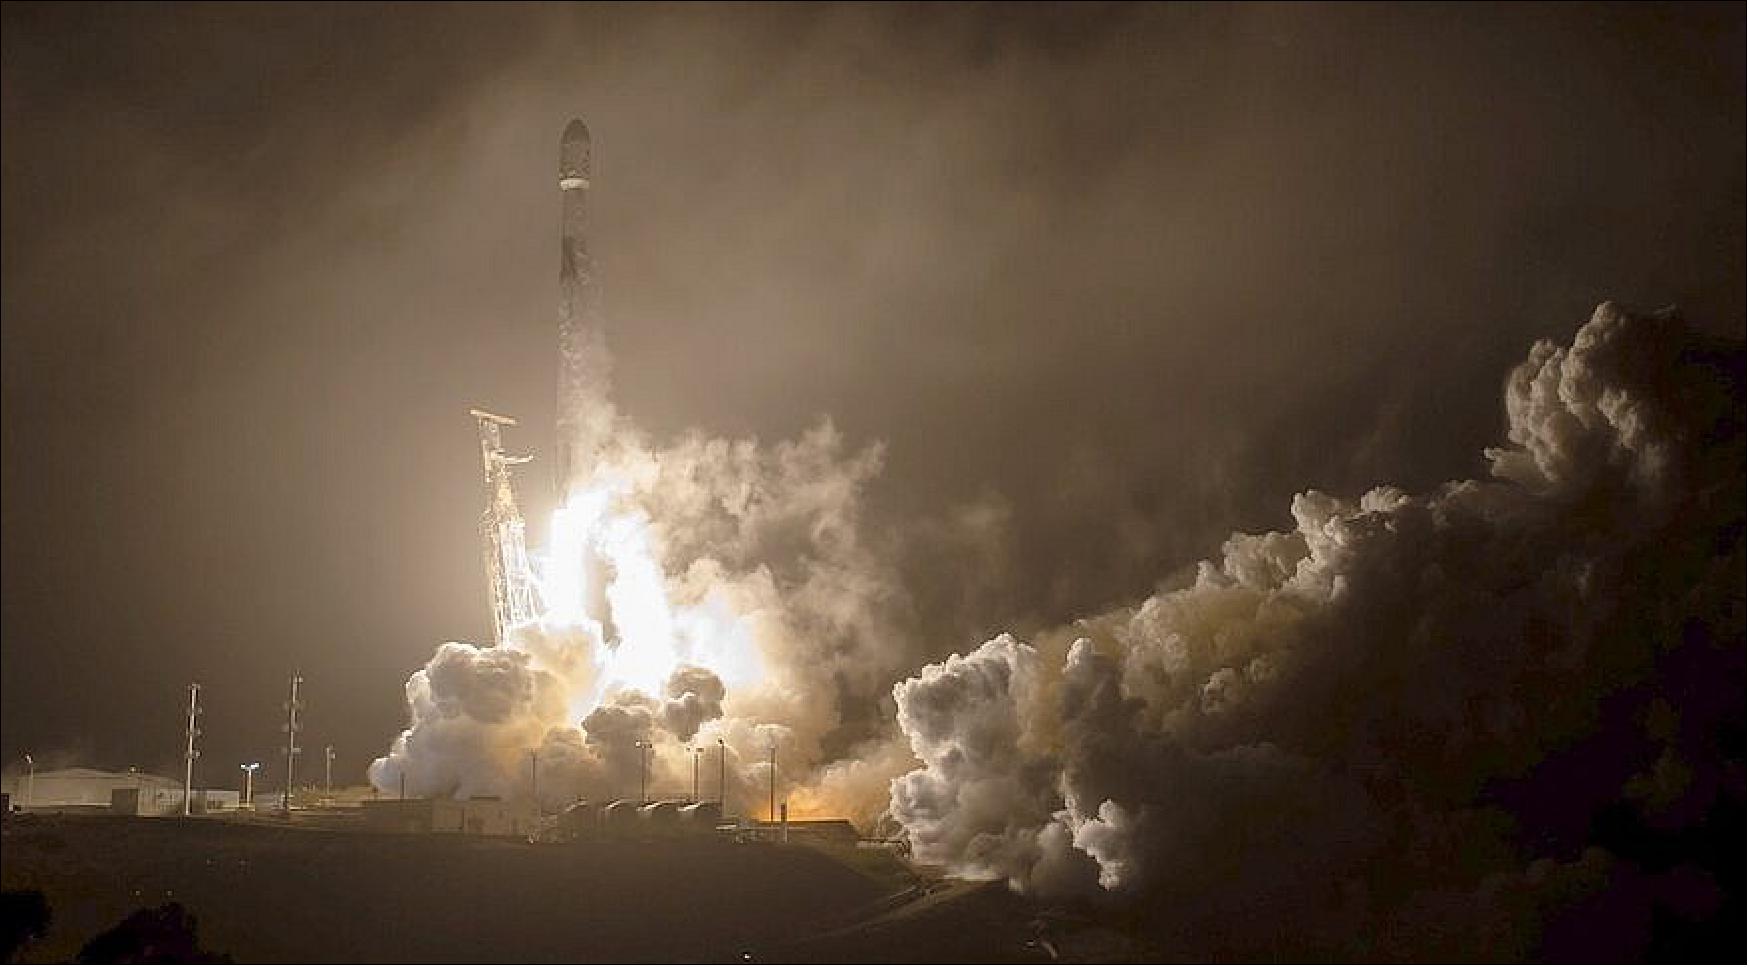 Figure 25: A SpaceX Falcon 9 lifts off Nov. 24 from Vandenberg Space Force Base in California carrying NASA's DART planetary defense mission (image credit: NASA, Bill Ingalls)